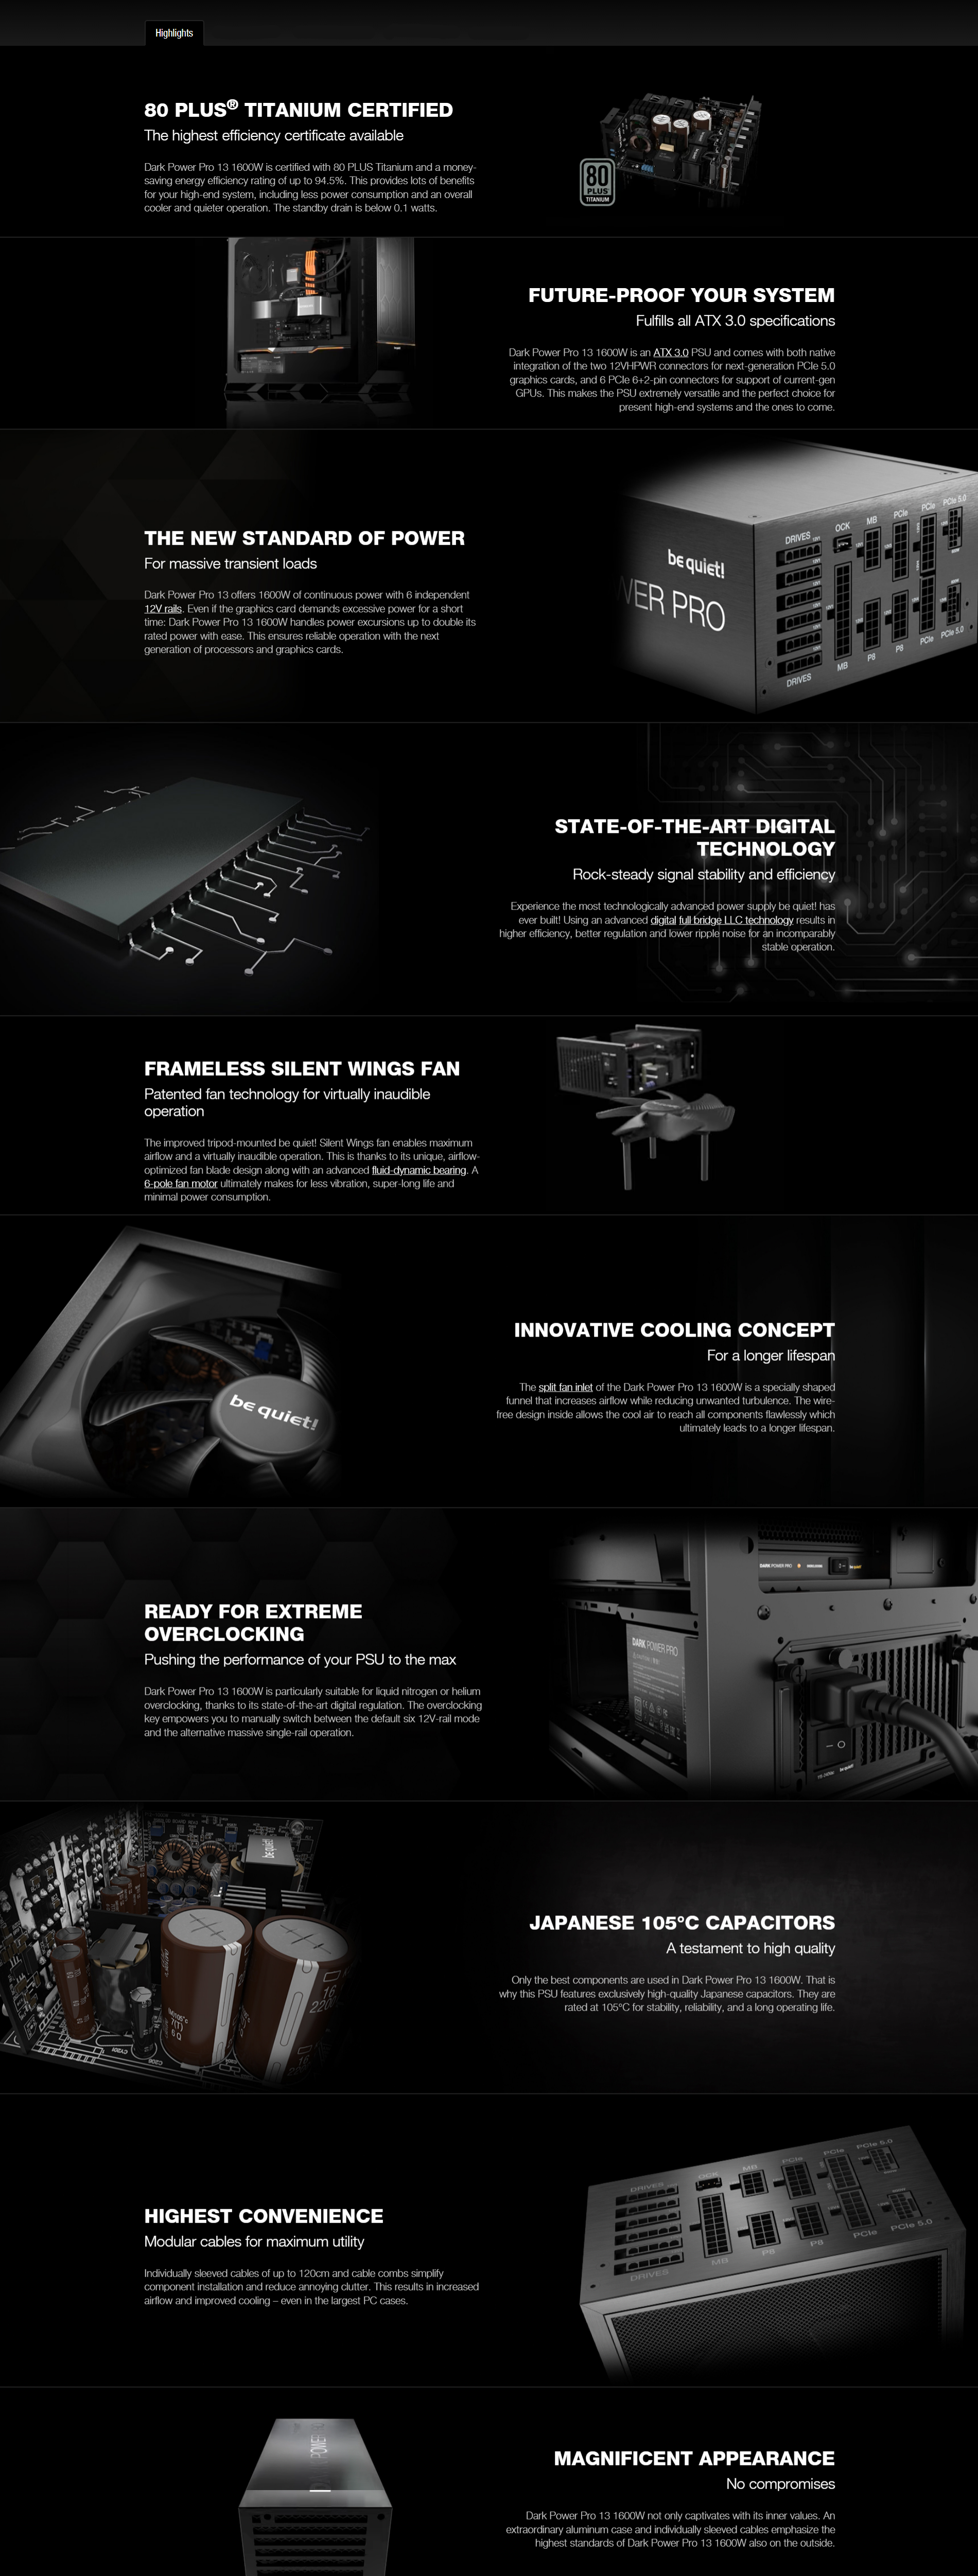 A large marketing image providing additional information about the product be quiet! Dark Power Pro 13 1600W Titanium PCIe 5.0 Modular PSU - Additional alt info not provided